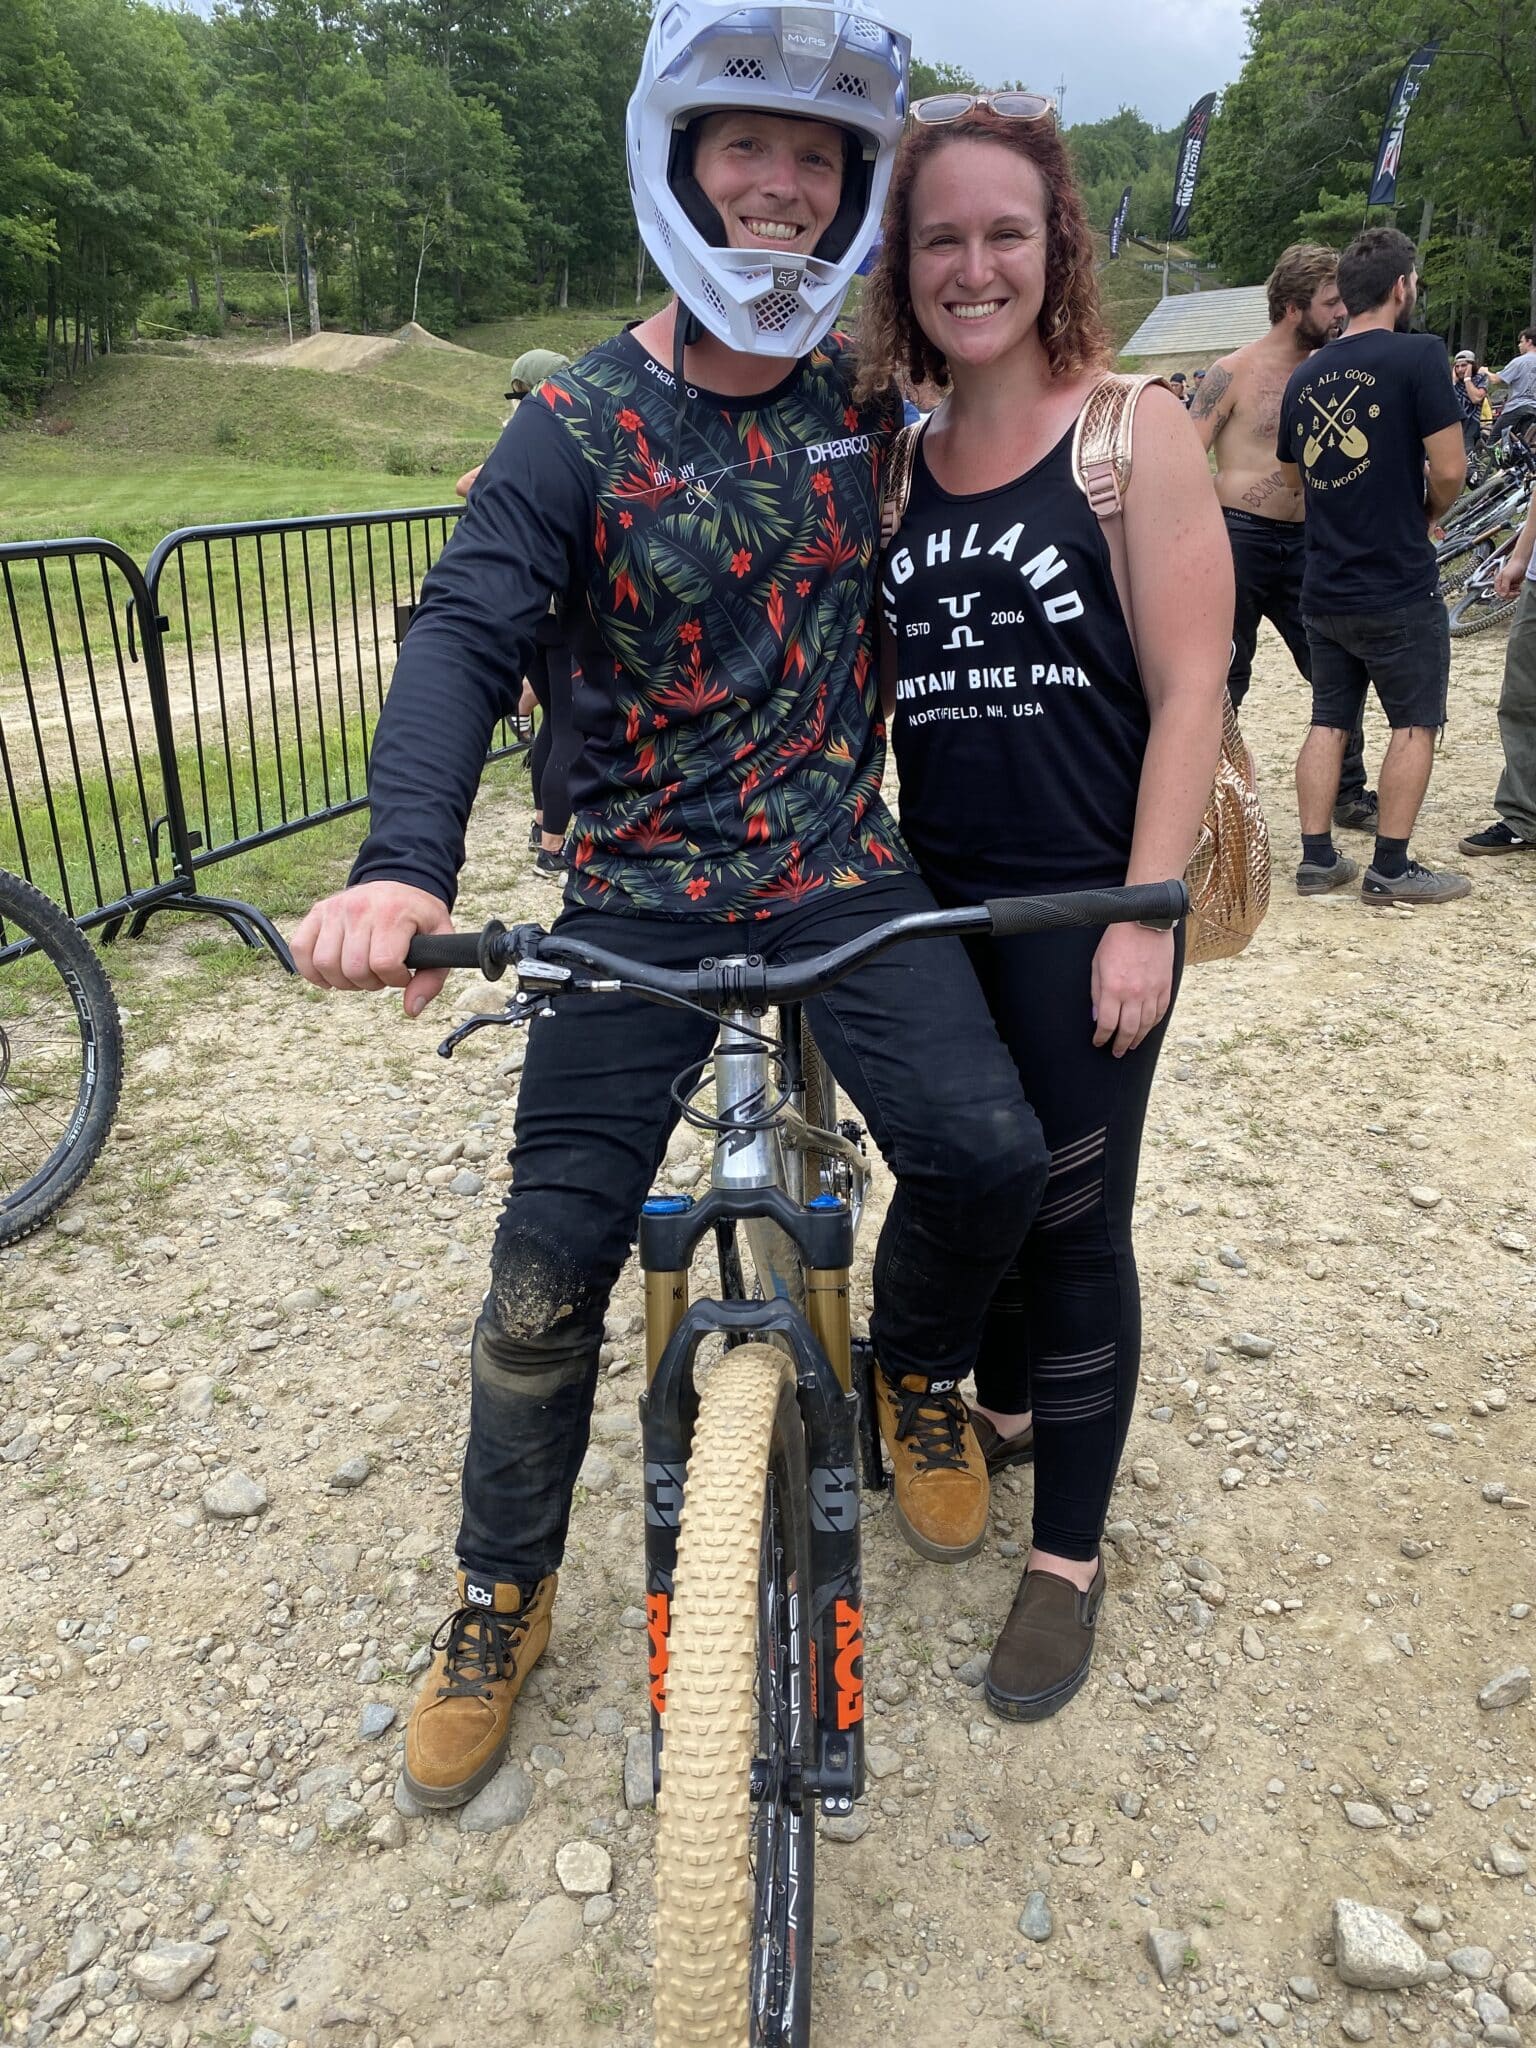 man sits on dirt bike wearing a helmet with arm around woman standing next to him